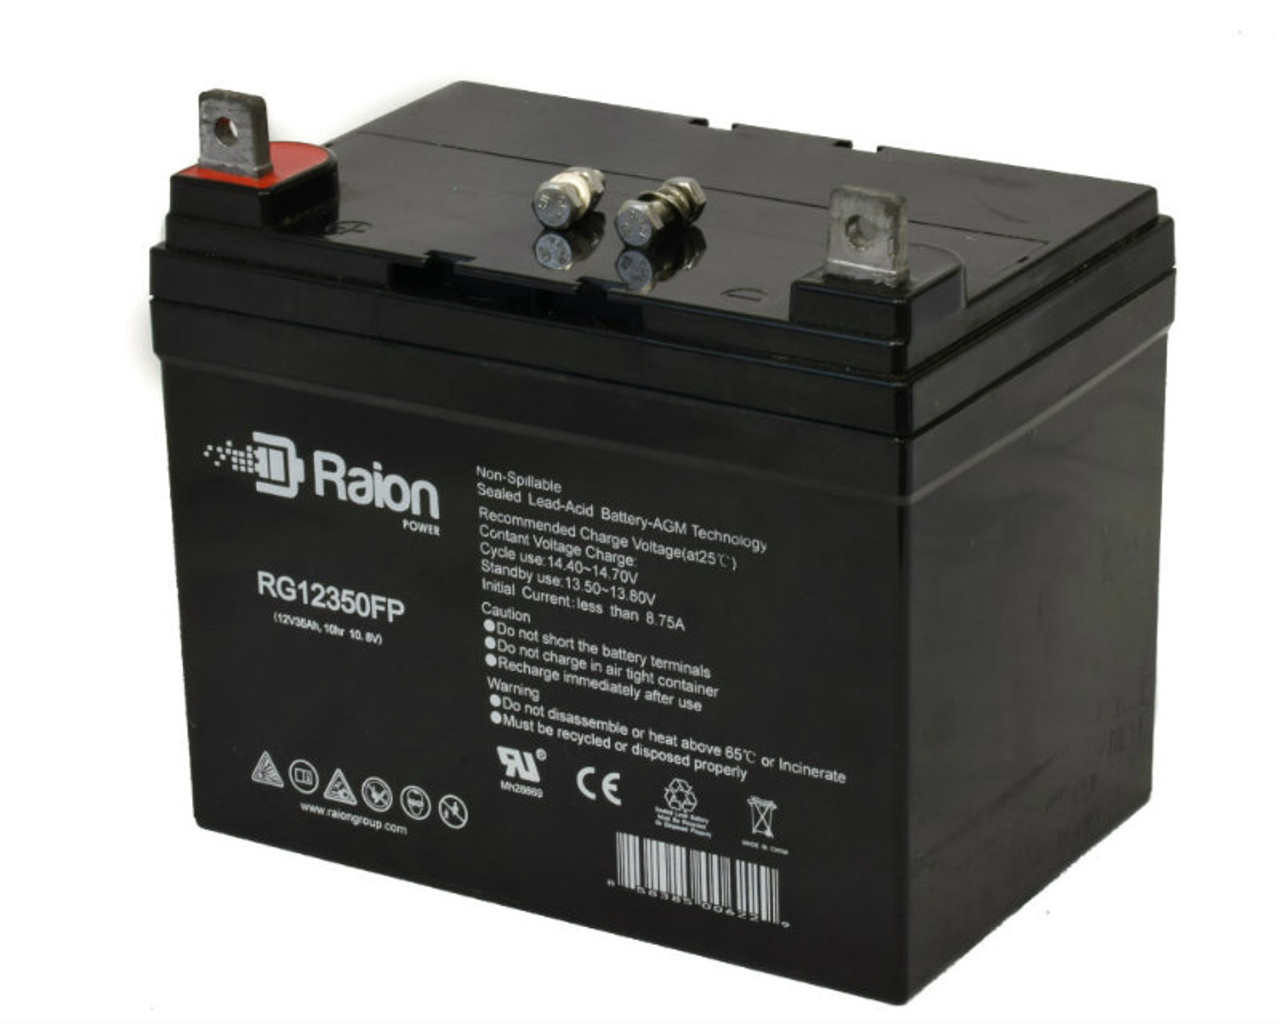 Raion Power Replacement 12V 35Ah Battery for Root MFG Co. 30-NB-E - 1 Pack